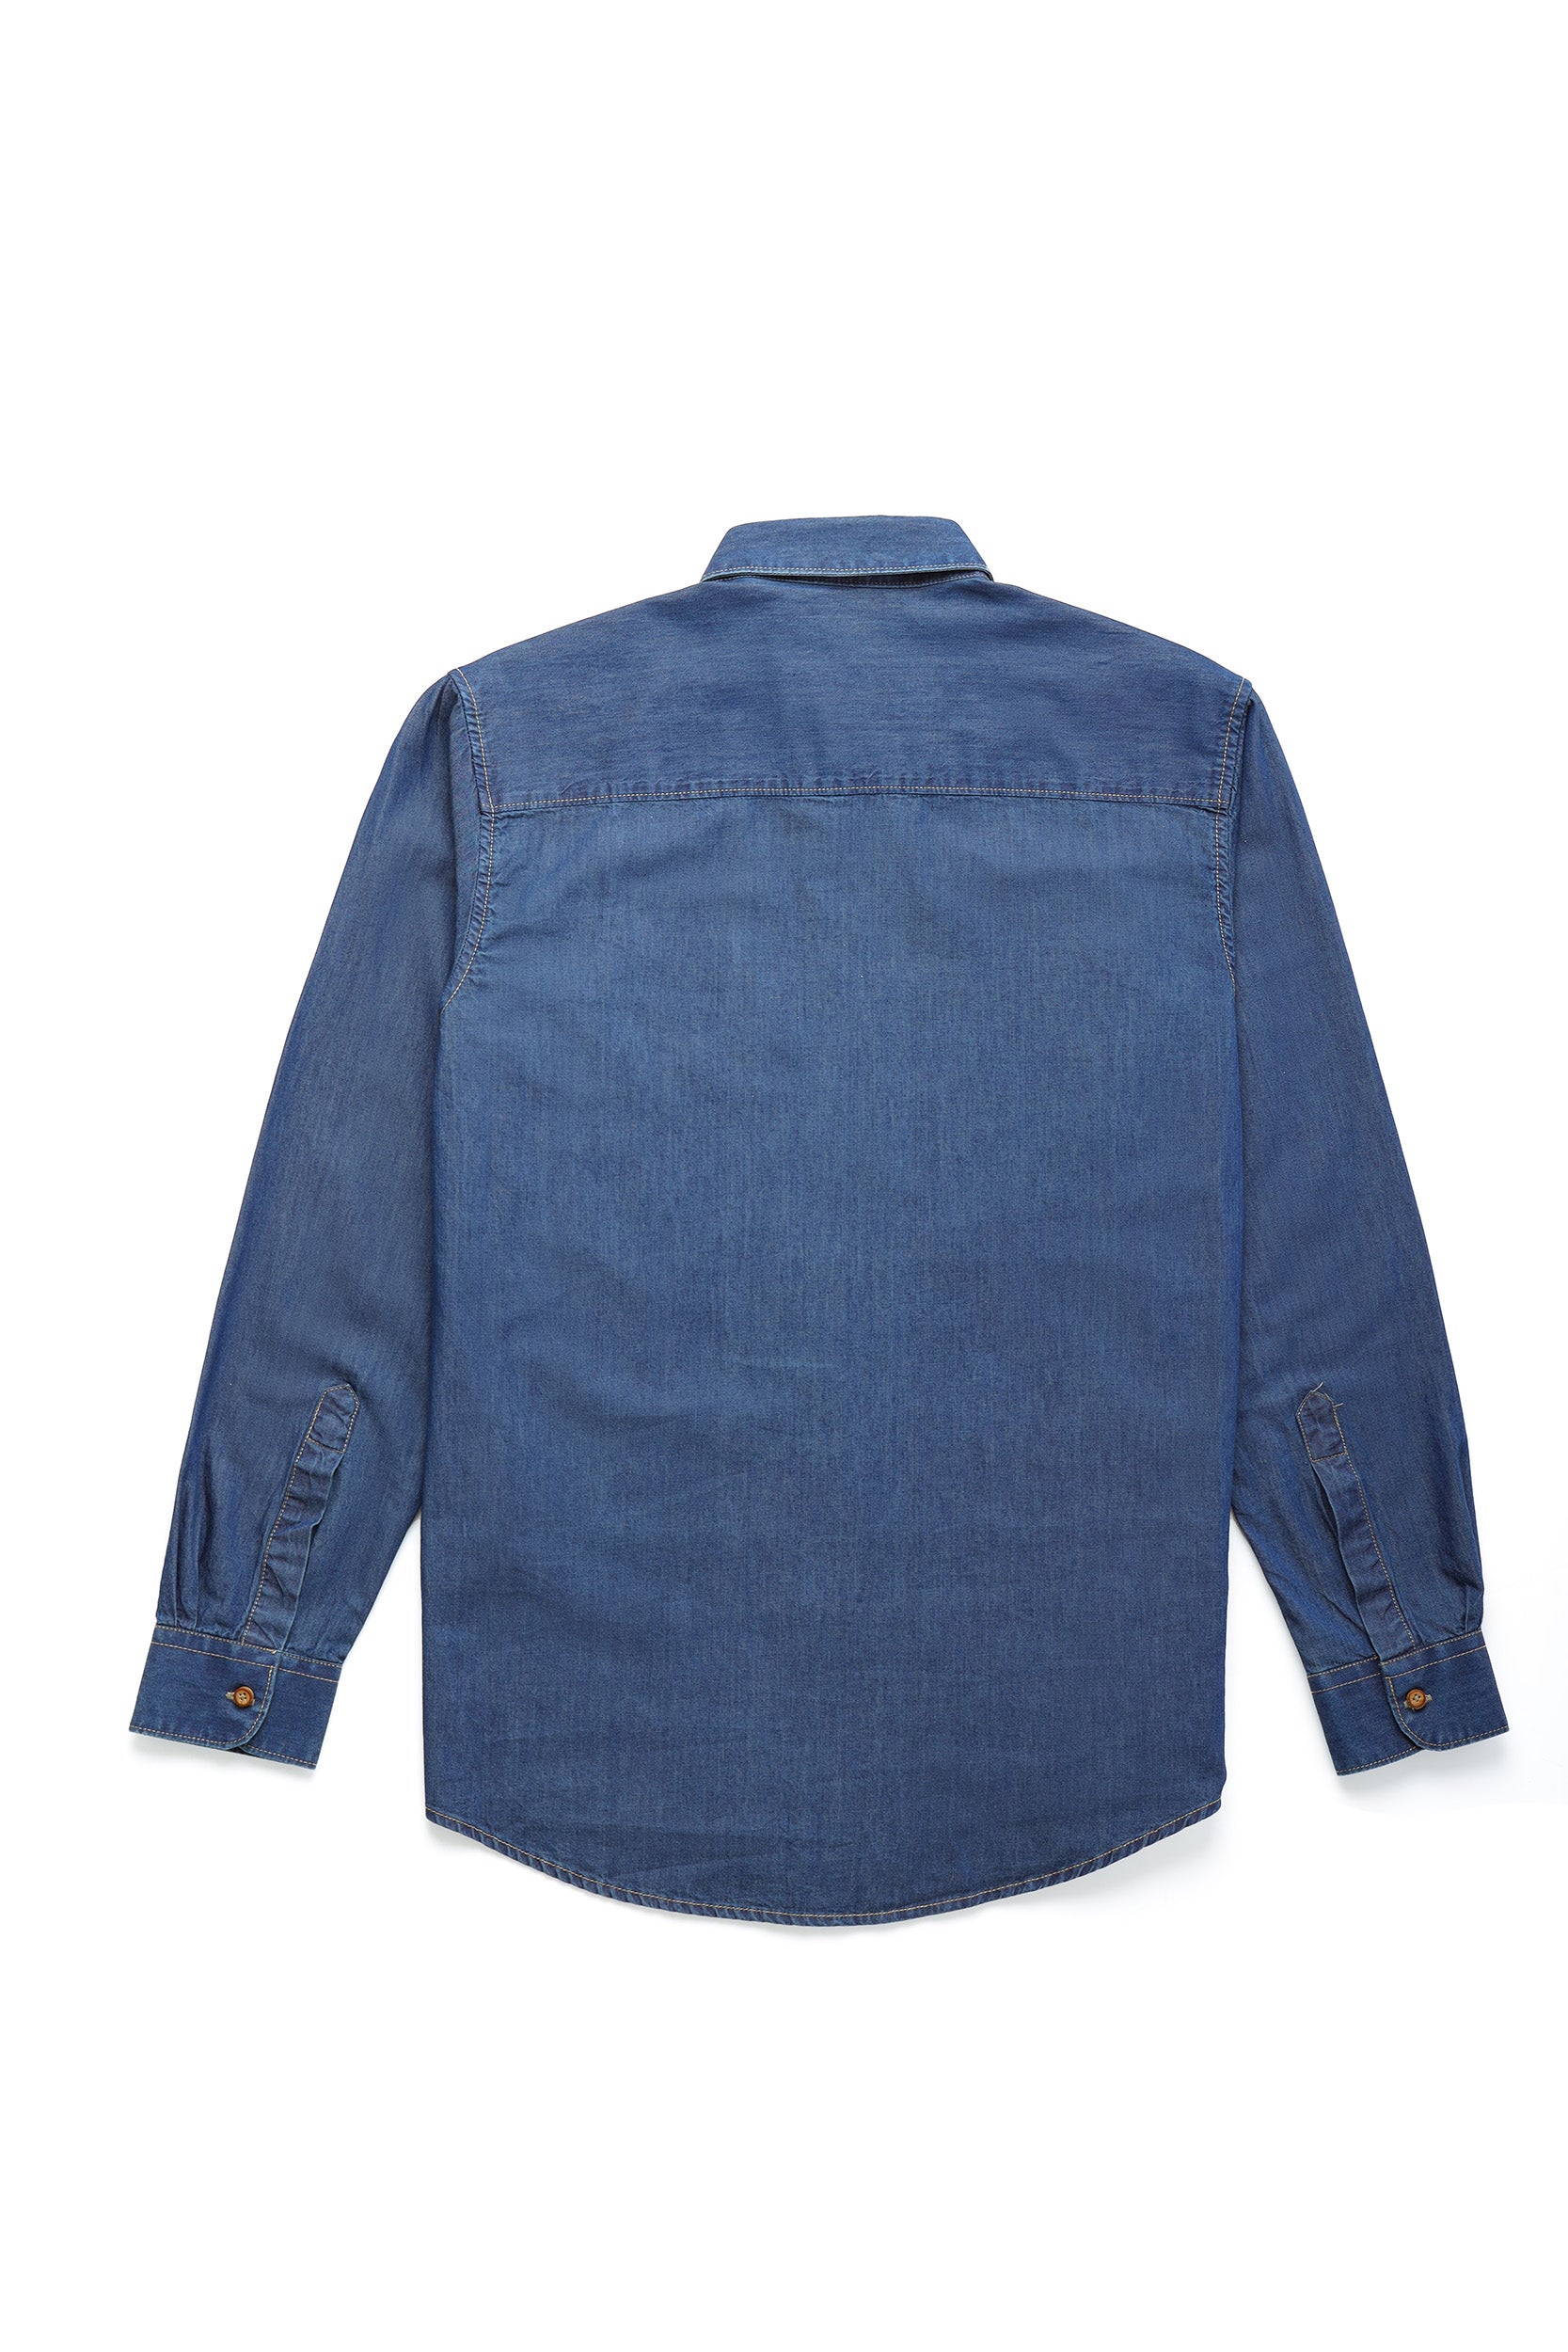 orSlow - Blue Chambray Work Shirt – Withered Fig